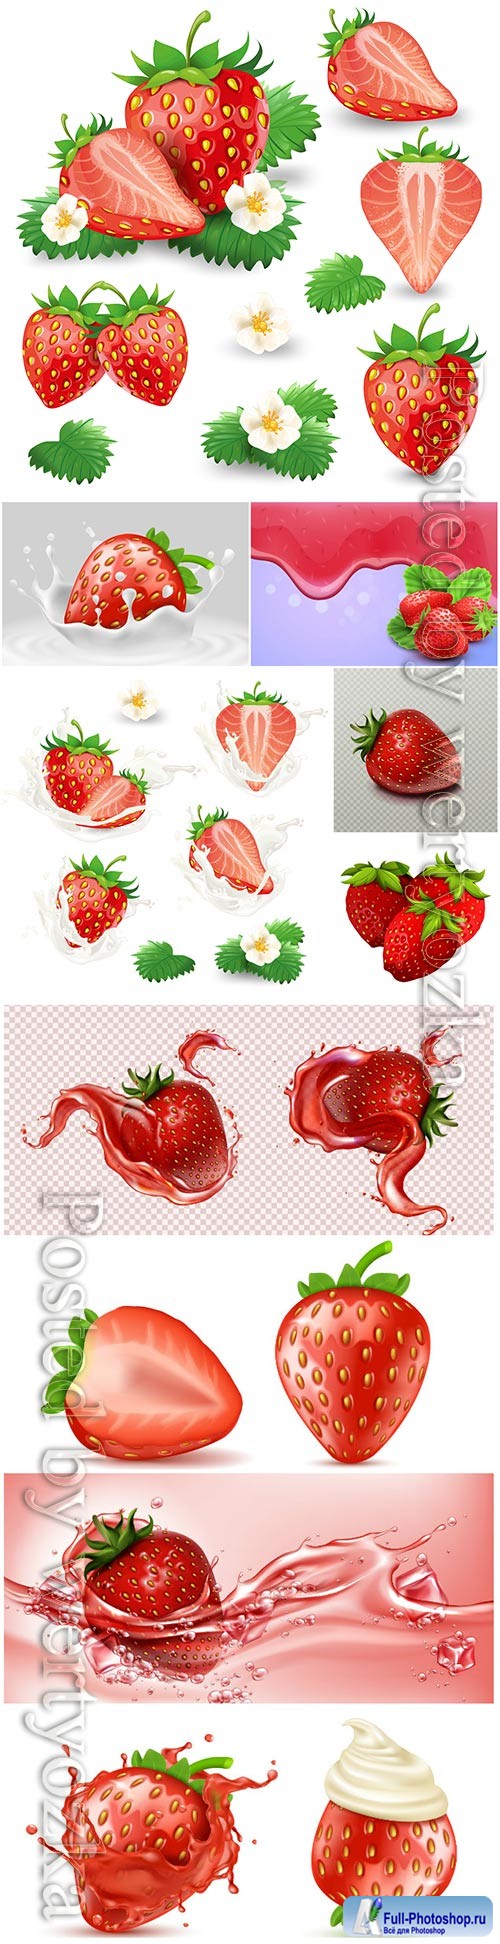 Strawberries, fruits and berries in vector